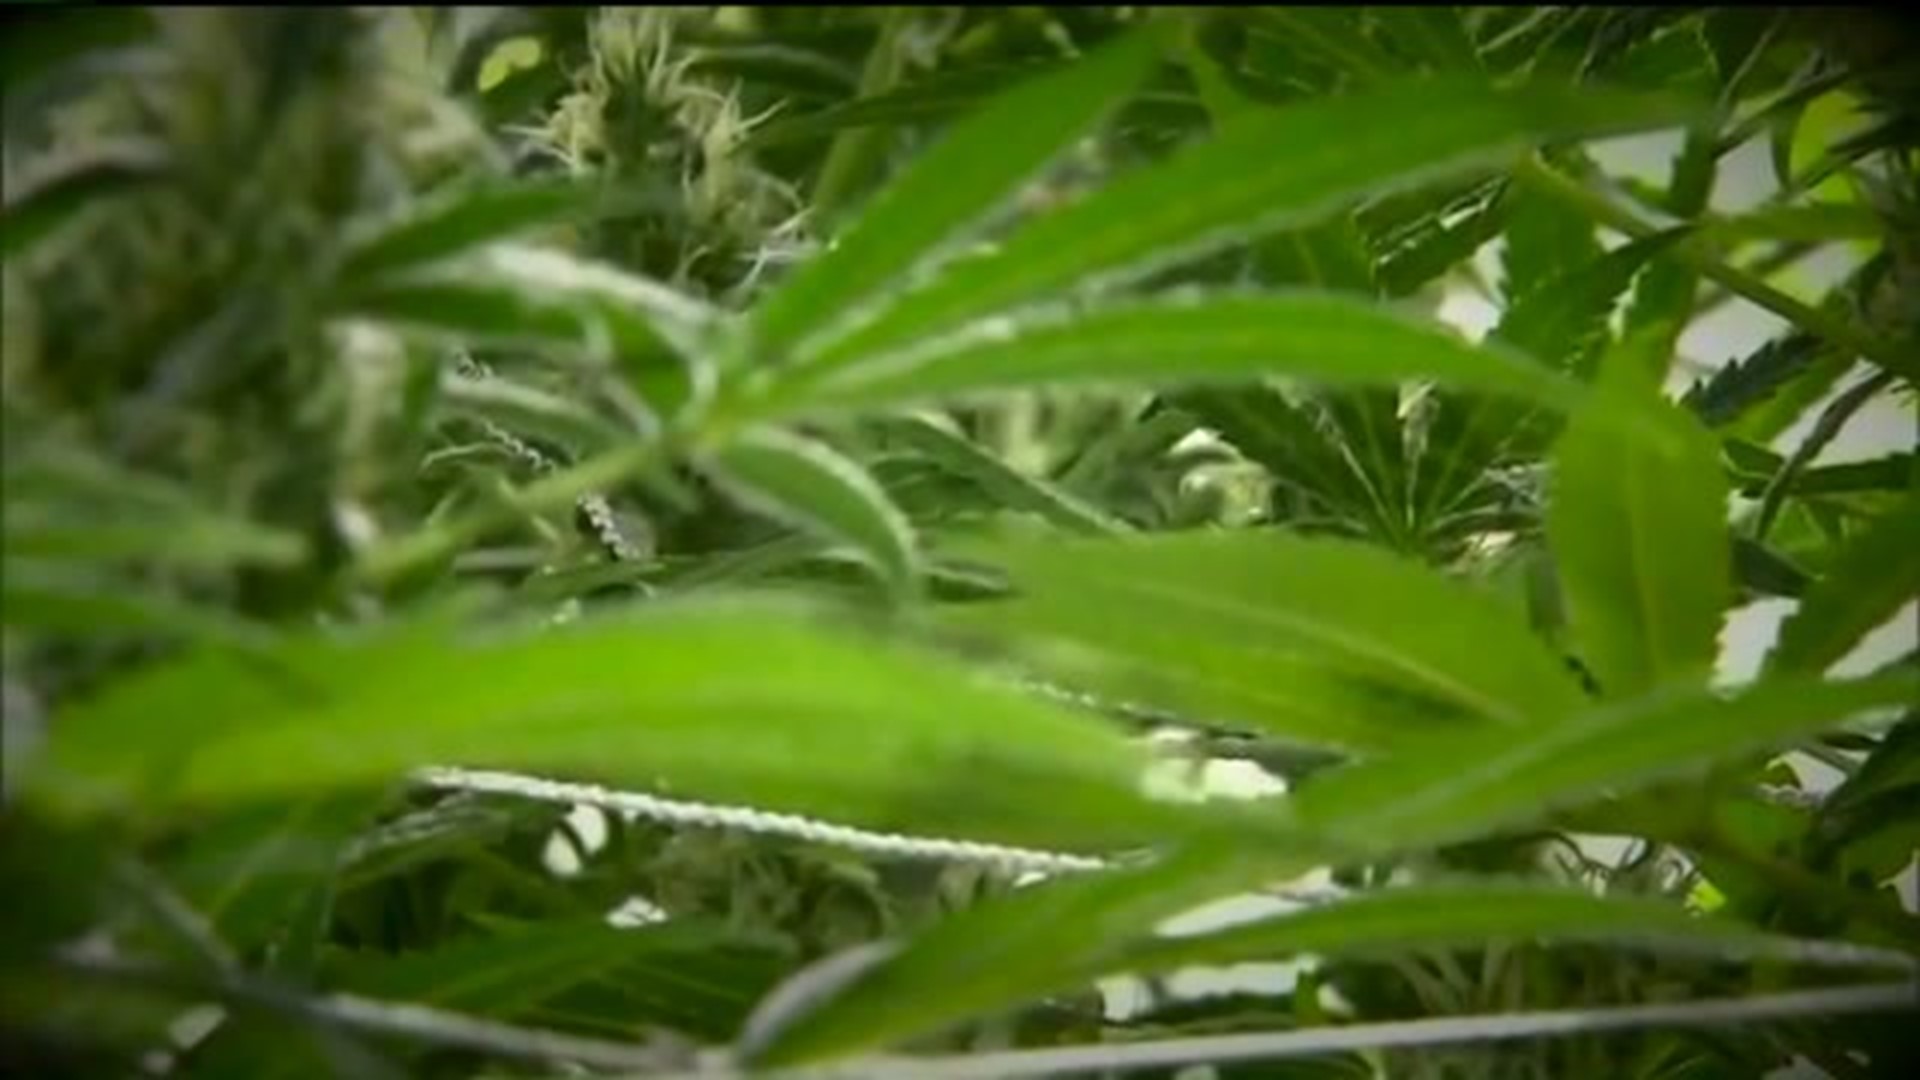 Residents Weigh In on Medical Marijuana in the Poconos